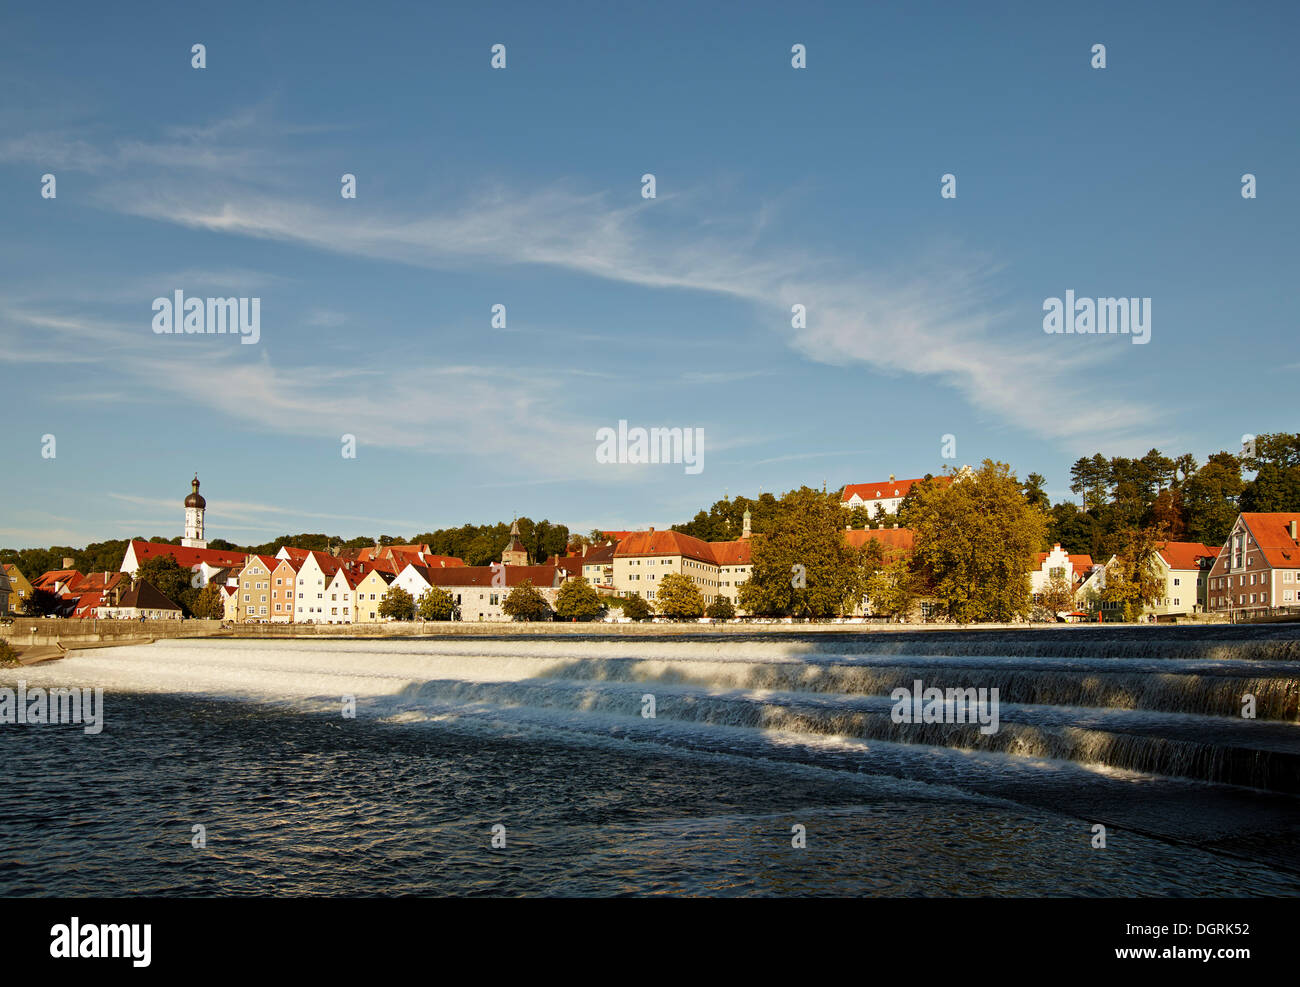 Lechwehr weir in front of the old town, Landsberg am Lech, Bavaria Stock Photo